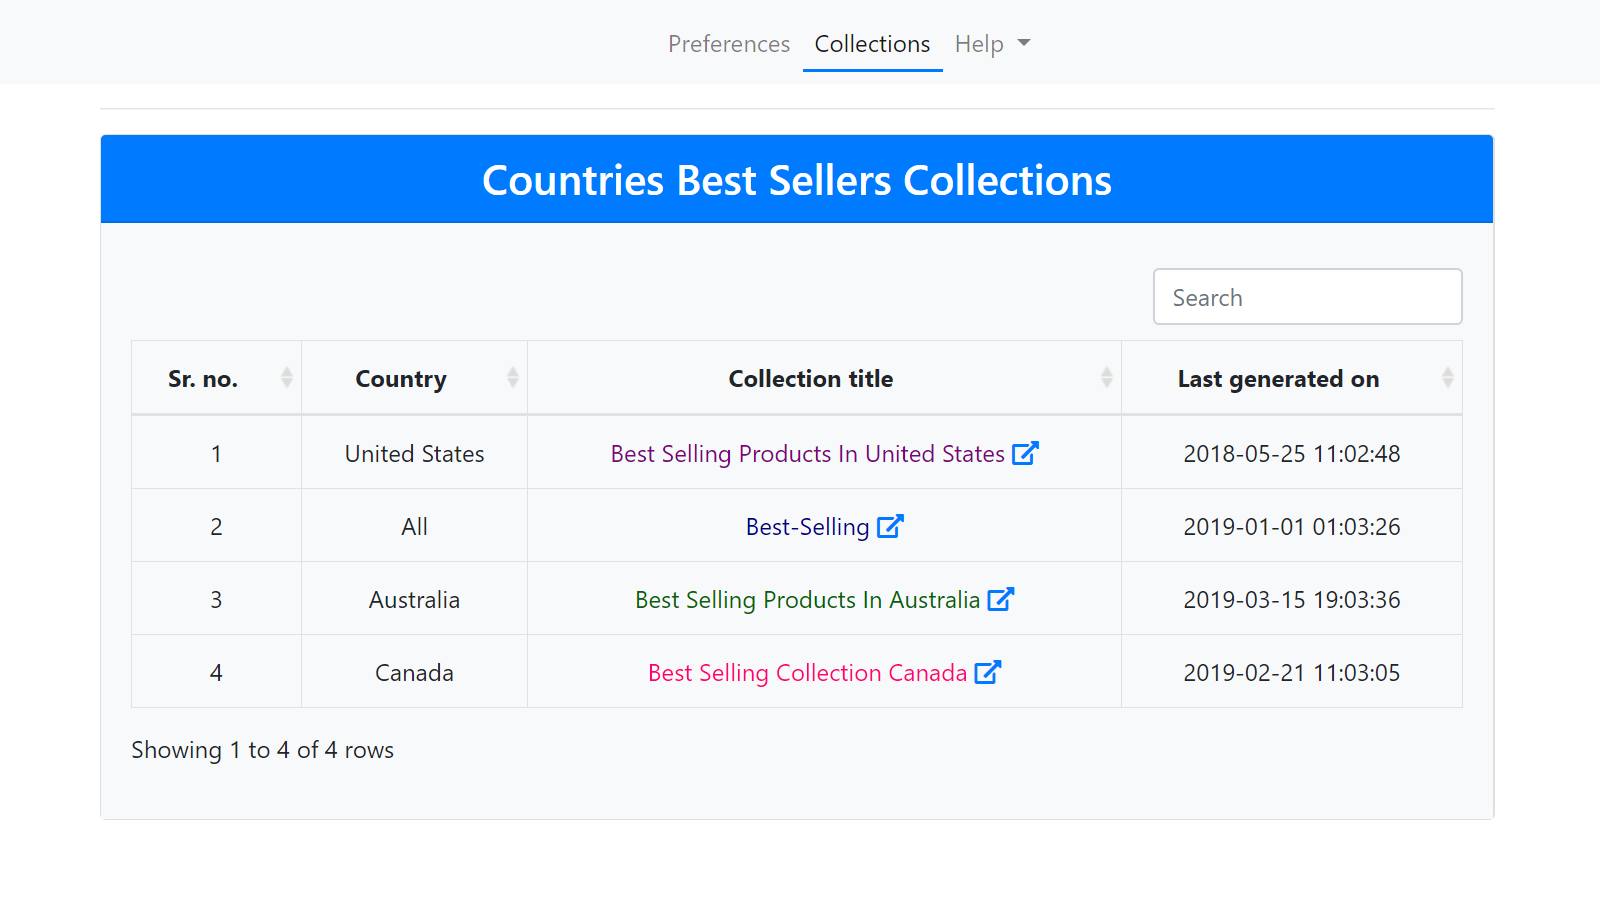 Best Selling by Country